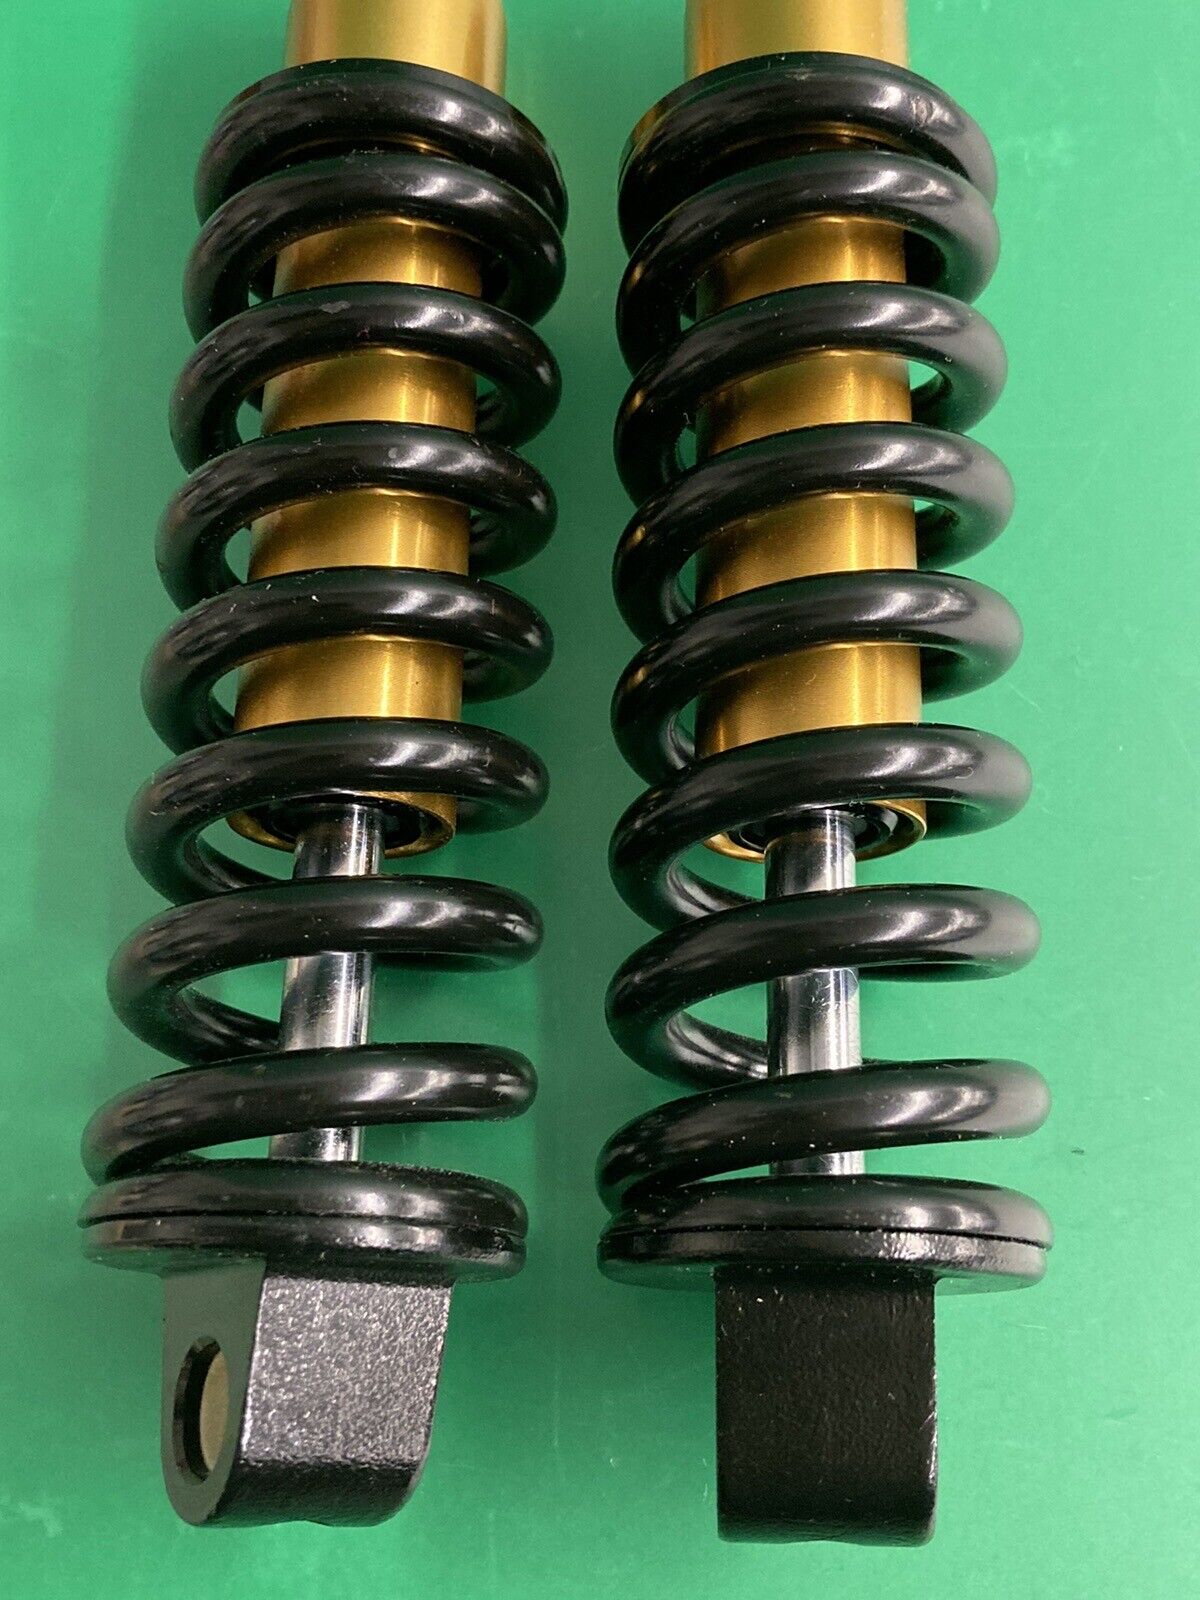 2 Shock Absorbers, Suspension for Quantum Edge 3 Power Wheelchair #J228